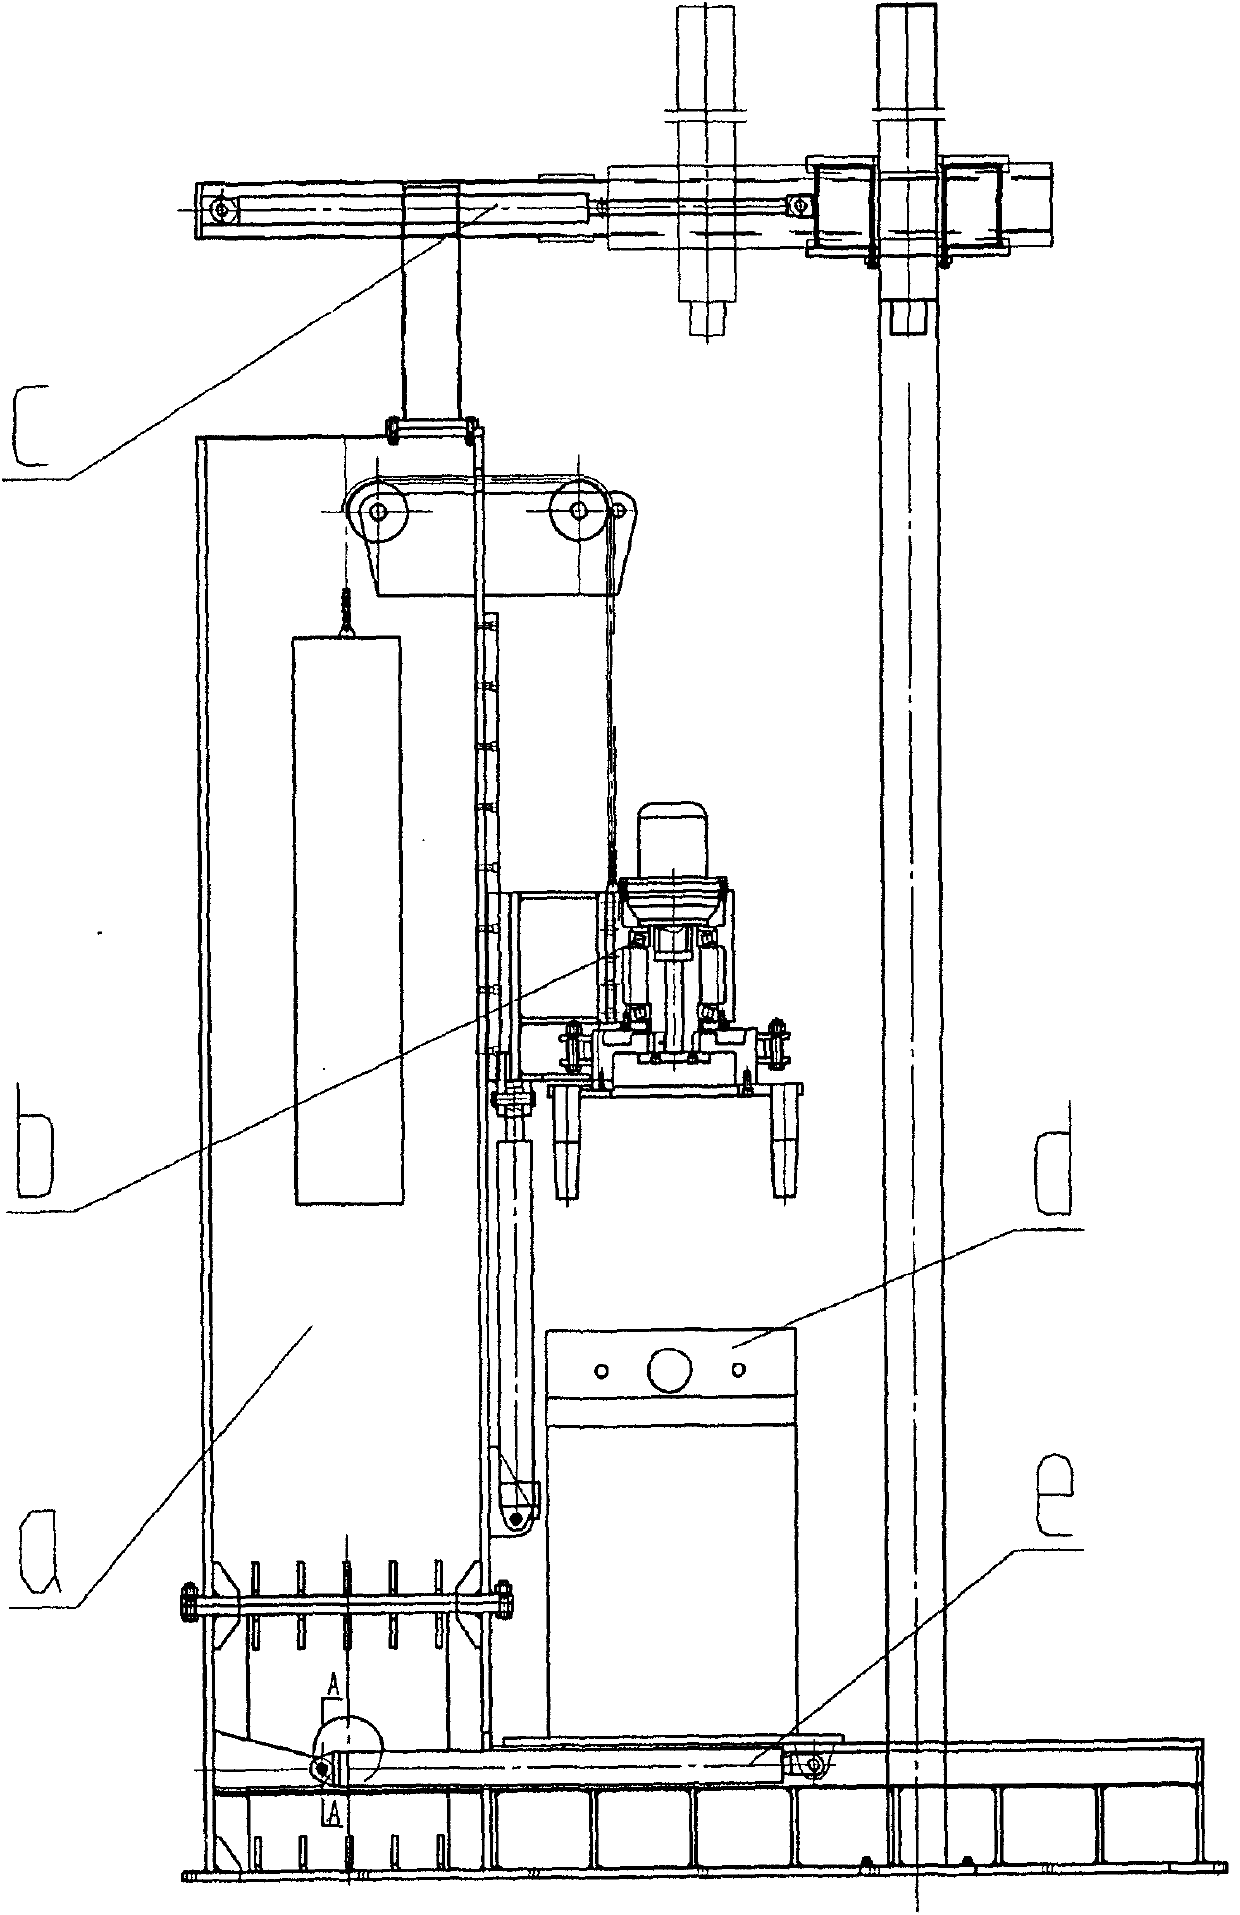 Novel upright assembling and disassembling device for upright columns of hydraulic support